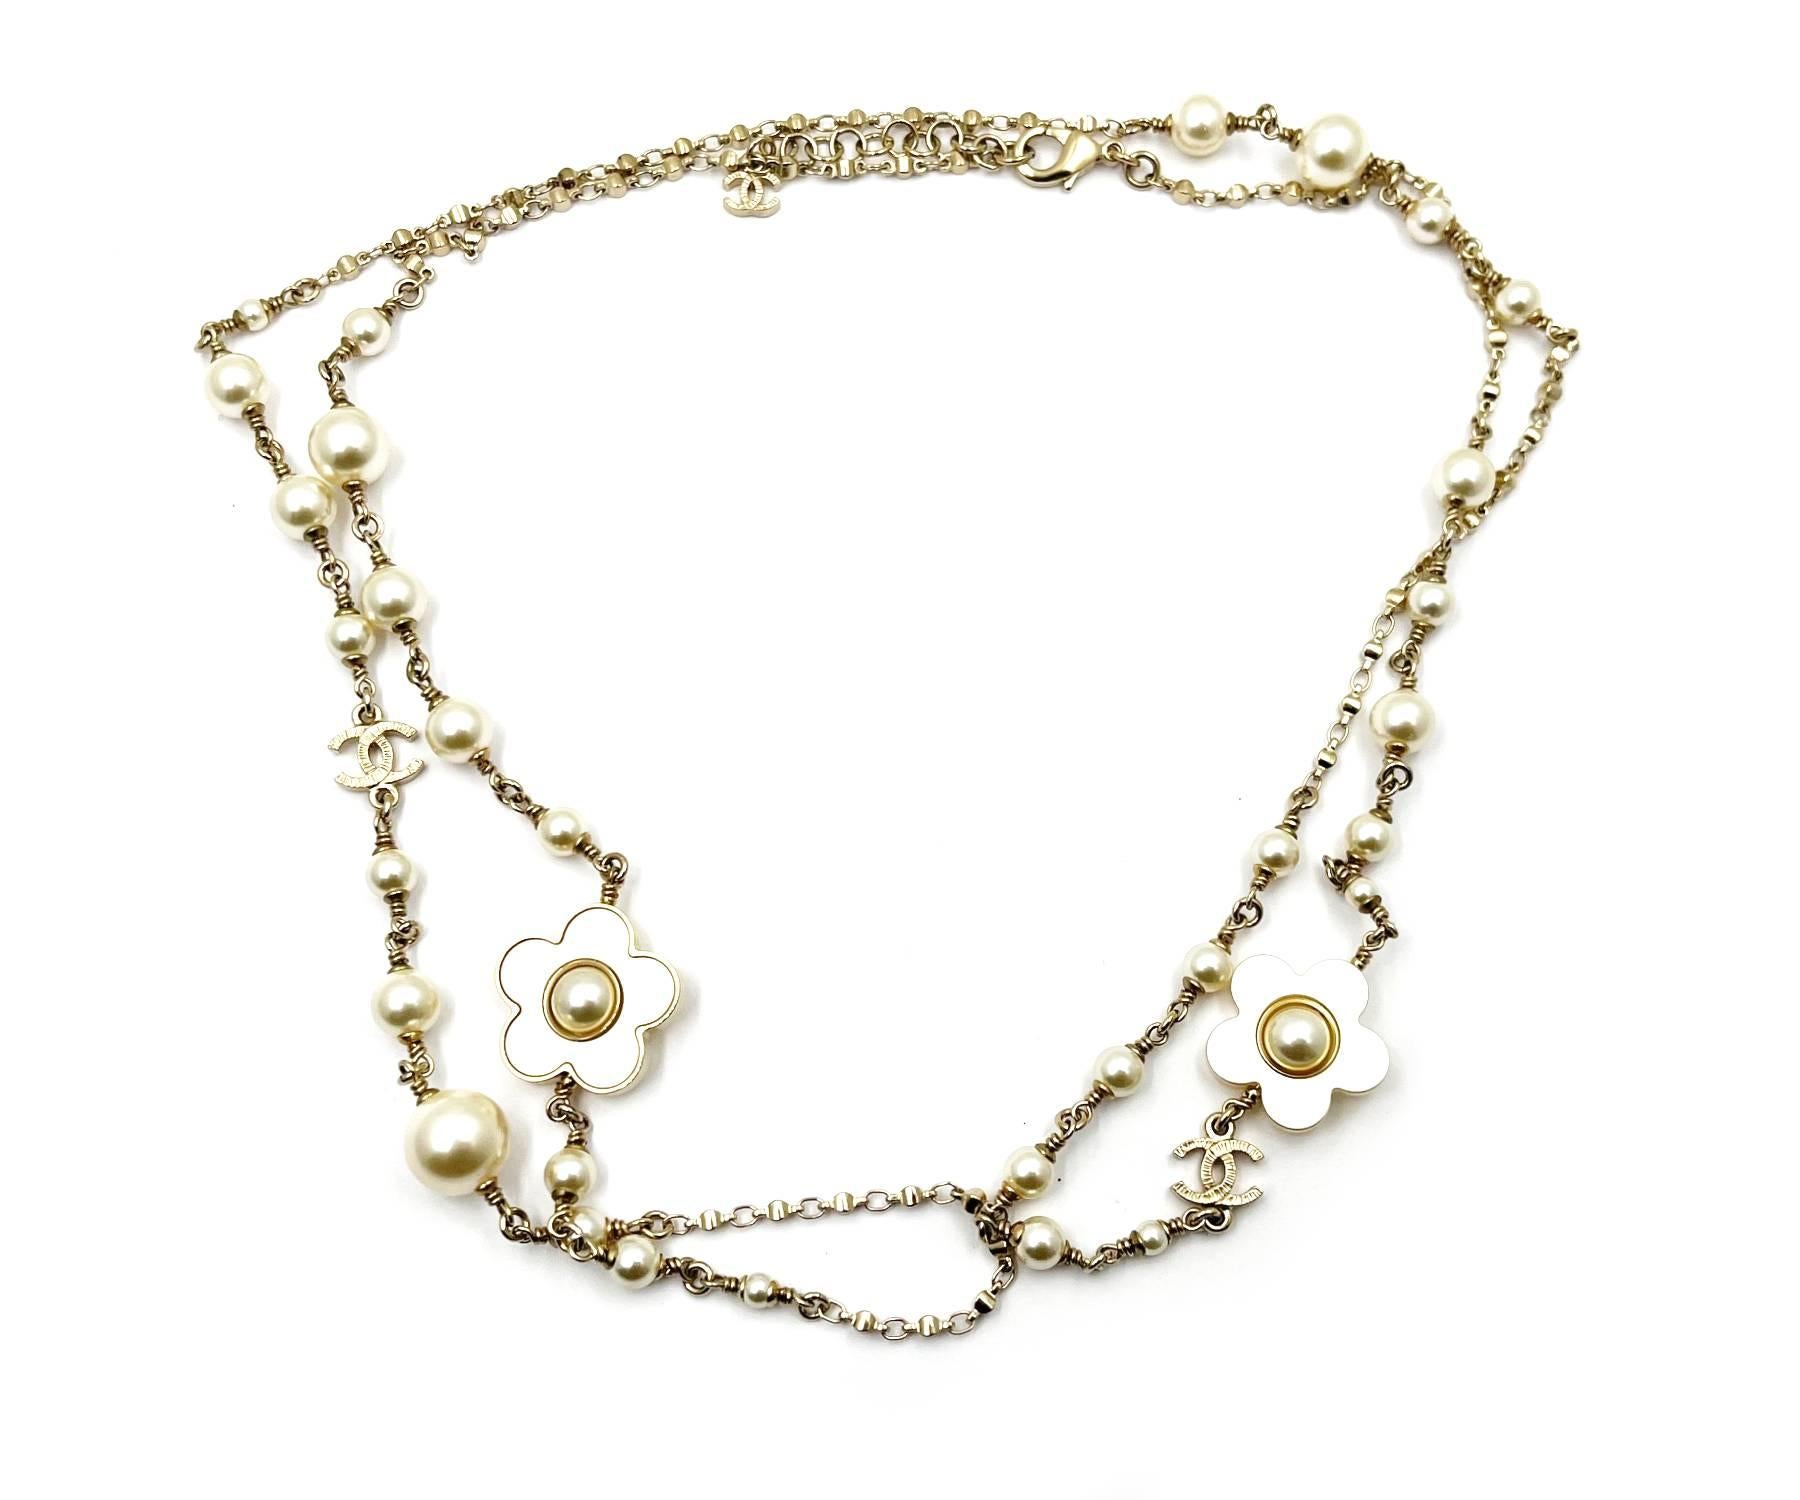 Chanel Gold CC Gold Frame White Flower Pearl Long Necklace

*Marked 18
*Made in France
*Comes with the original box, pouch and booklet

-The total length is approximately 44